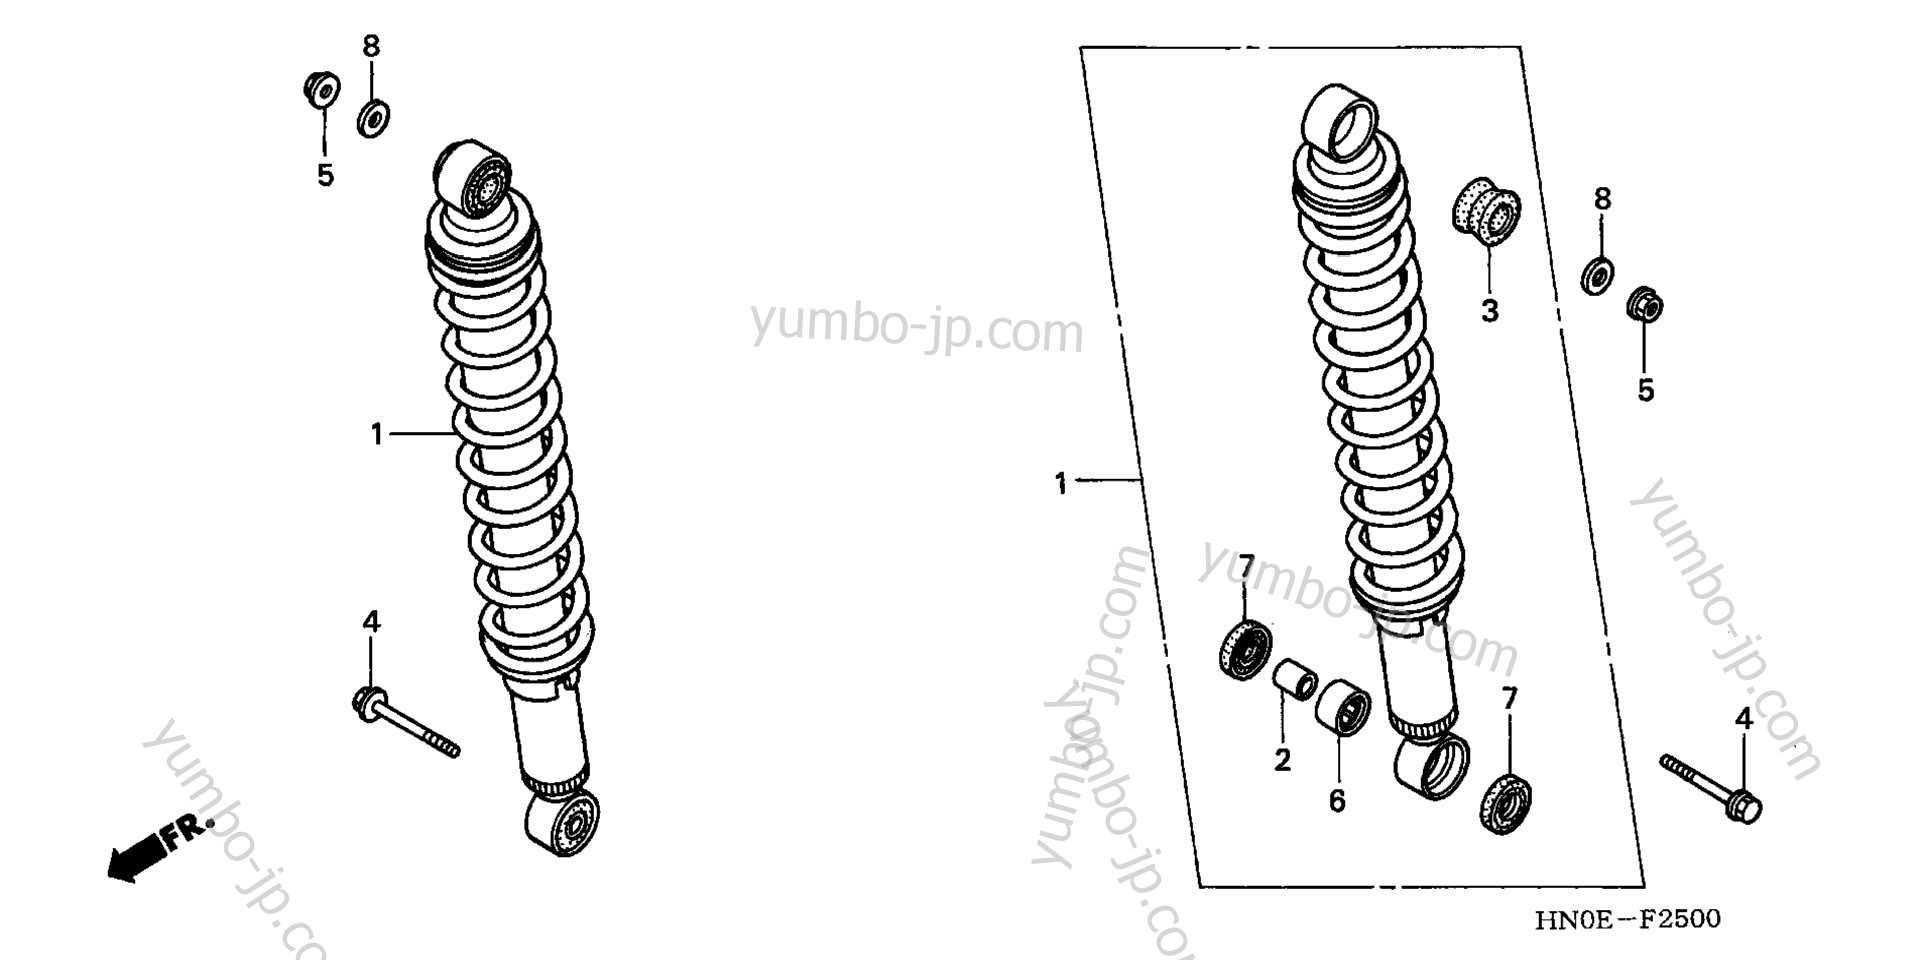 REAR SHOCK ABSORBER for ATVs HONDA TRX450FM A 2002 year